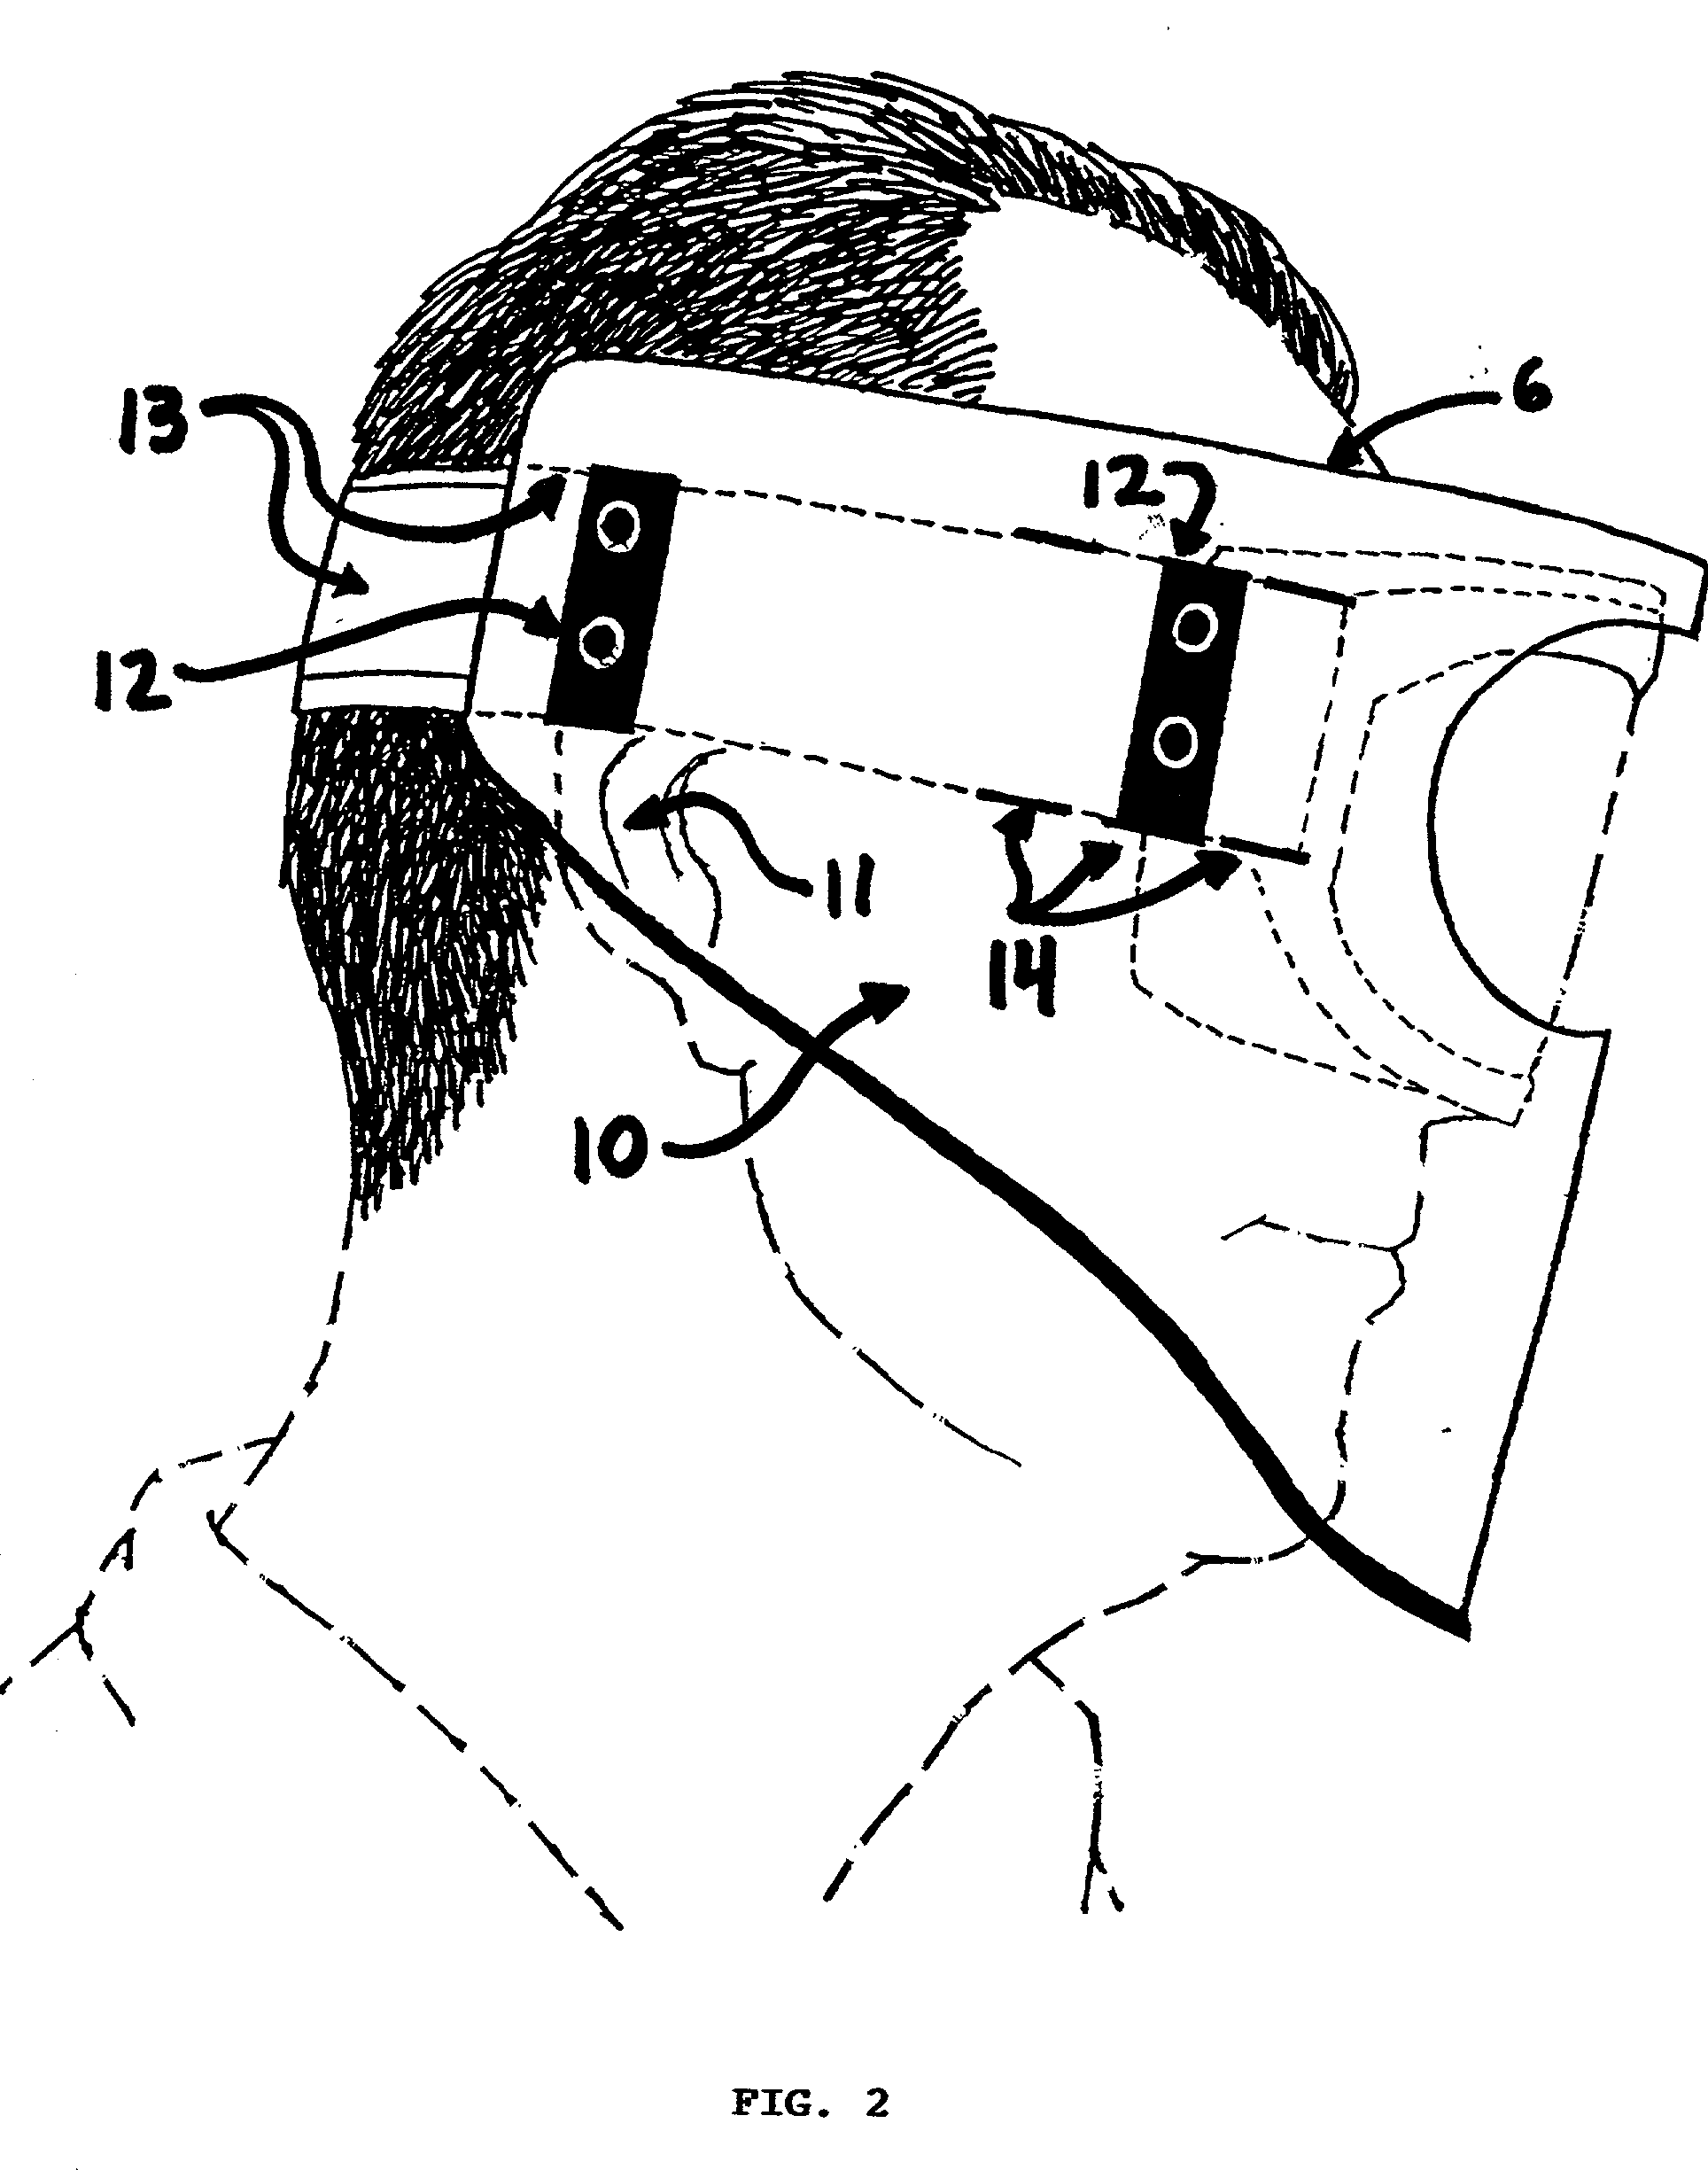 Face shield that attaches to existing eye goggle